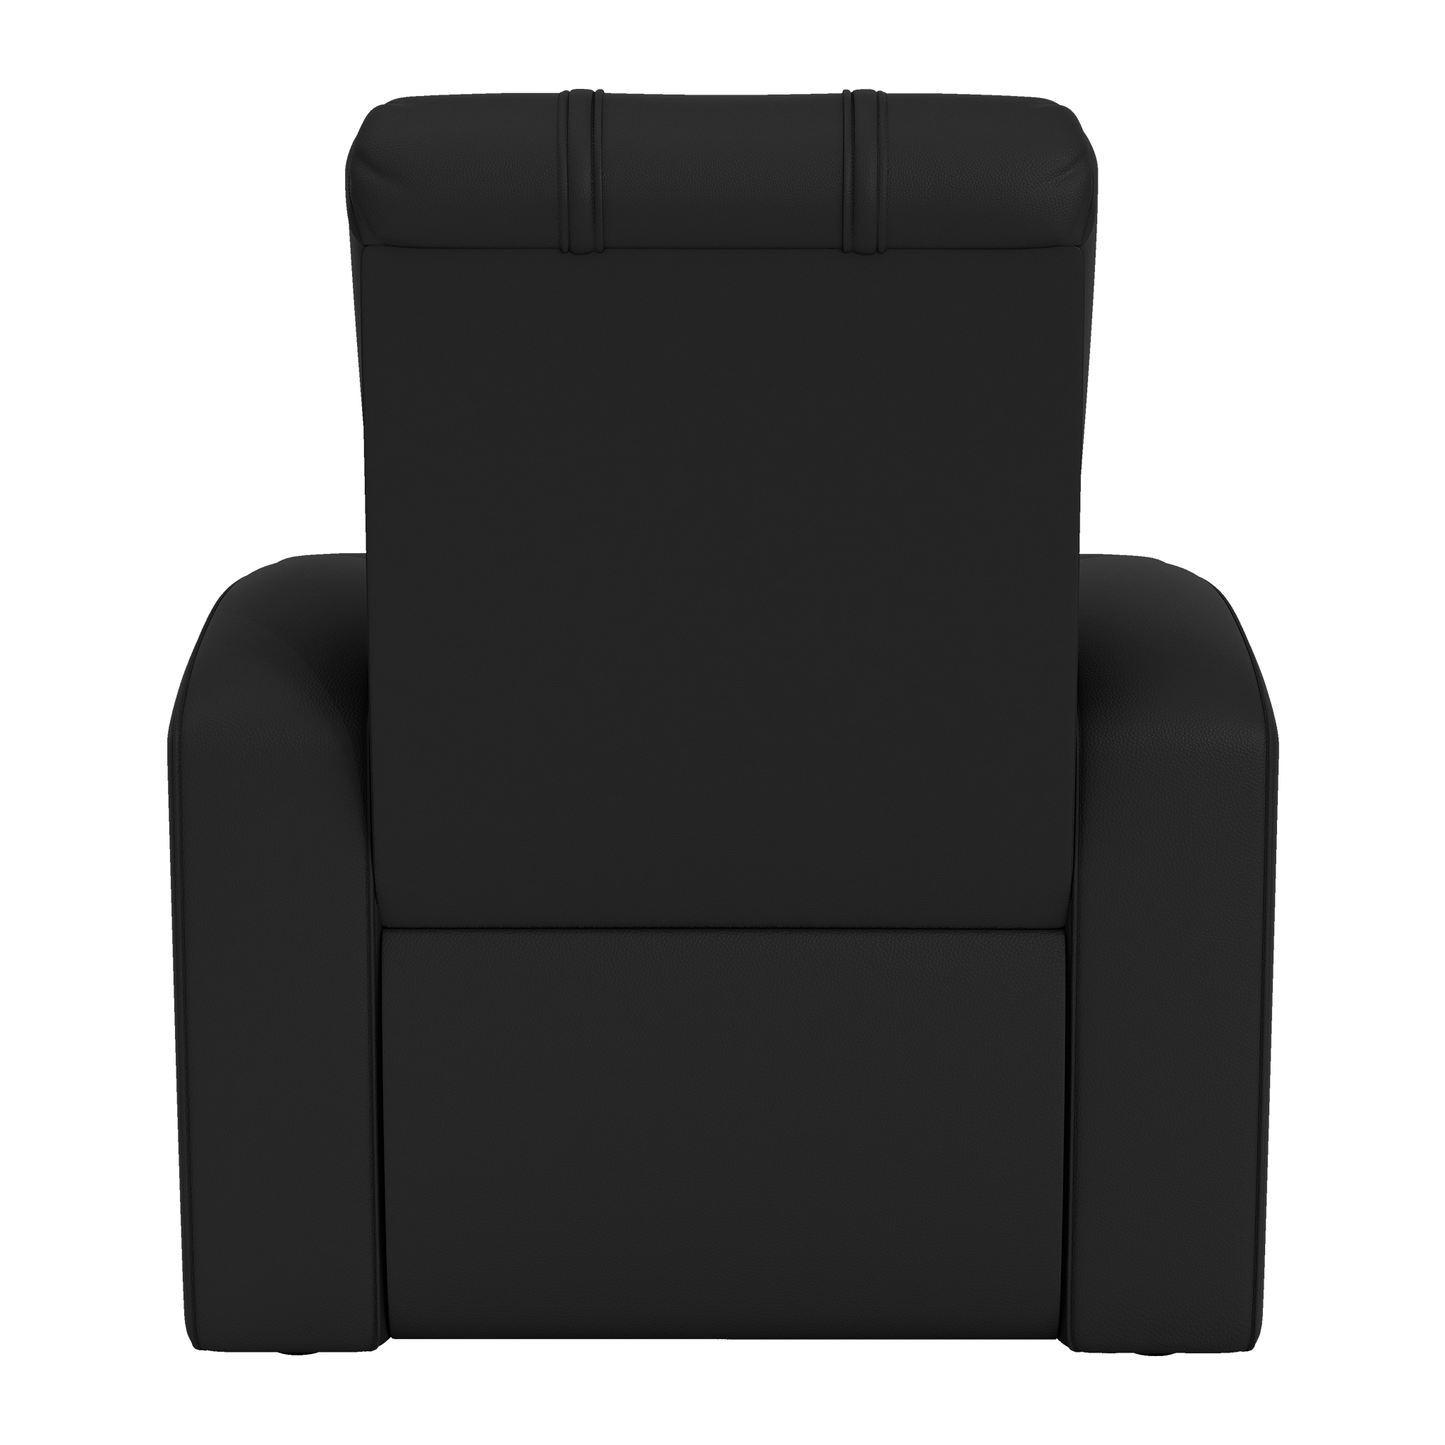 Relax Home Theater Recliner with Louisville Cardinals Logo